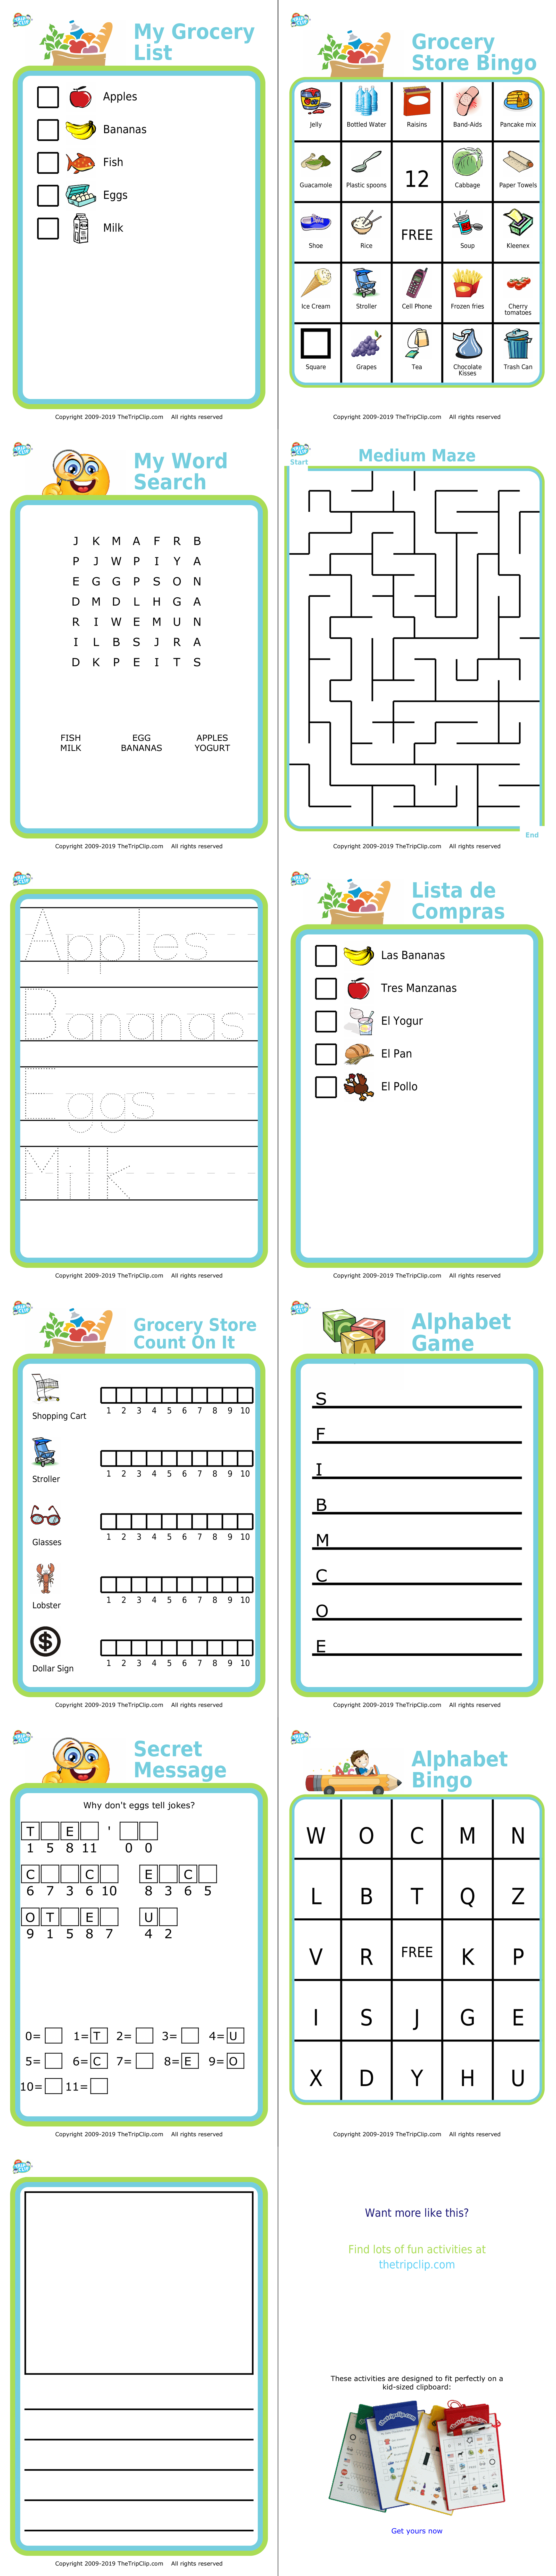 Ten free printable to survive the grocery store, picture list, bingo, word search, more